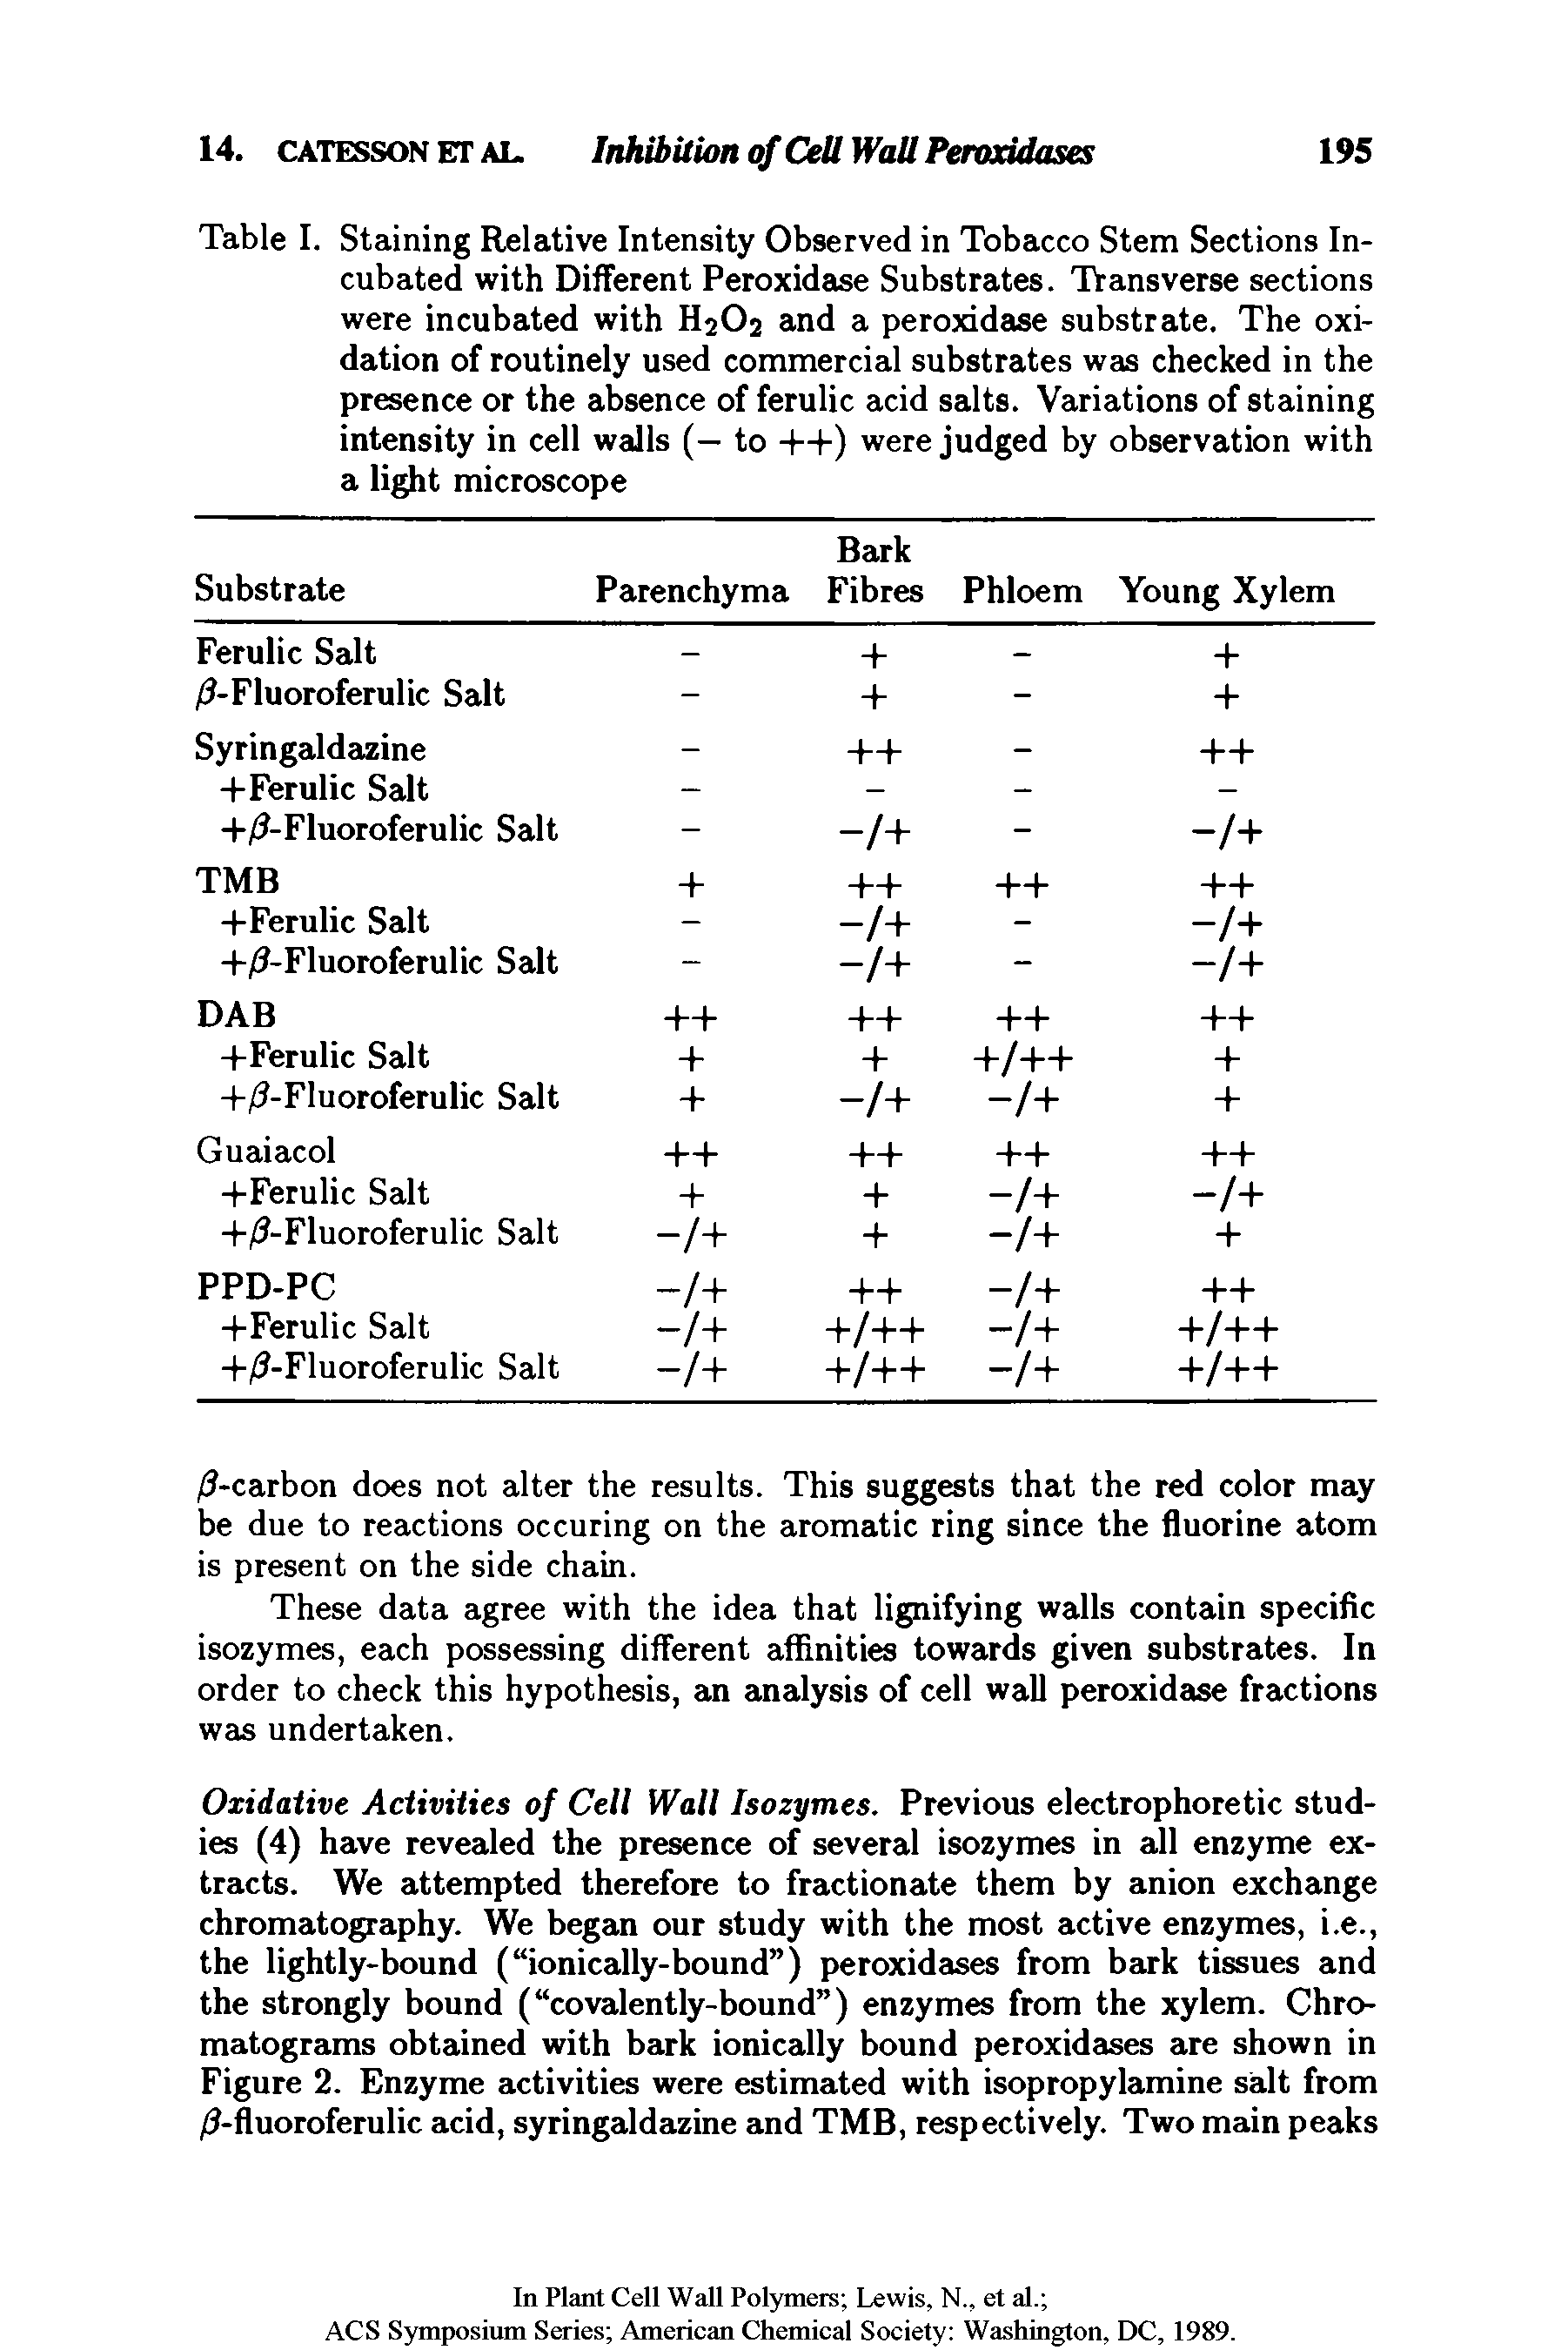 Table I. Staining Relative Intensity Observed in Tobacco Stem Sections Incubated with Different Peroxidase Substrates. Transverse sections were incubated with H2O2 and a peroxidase substrate. The oxidation of routinely used commercial substrates was checked in the presence or the absence of ferulic acid salts. Variations of staining intensity in cell walls (— to ++) were judged by observation with a light microscope...